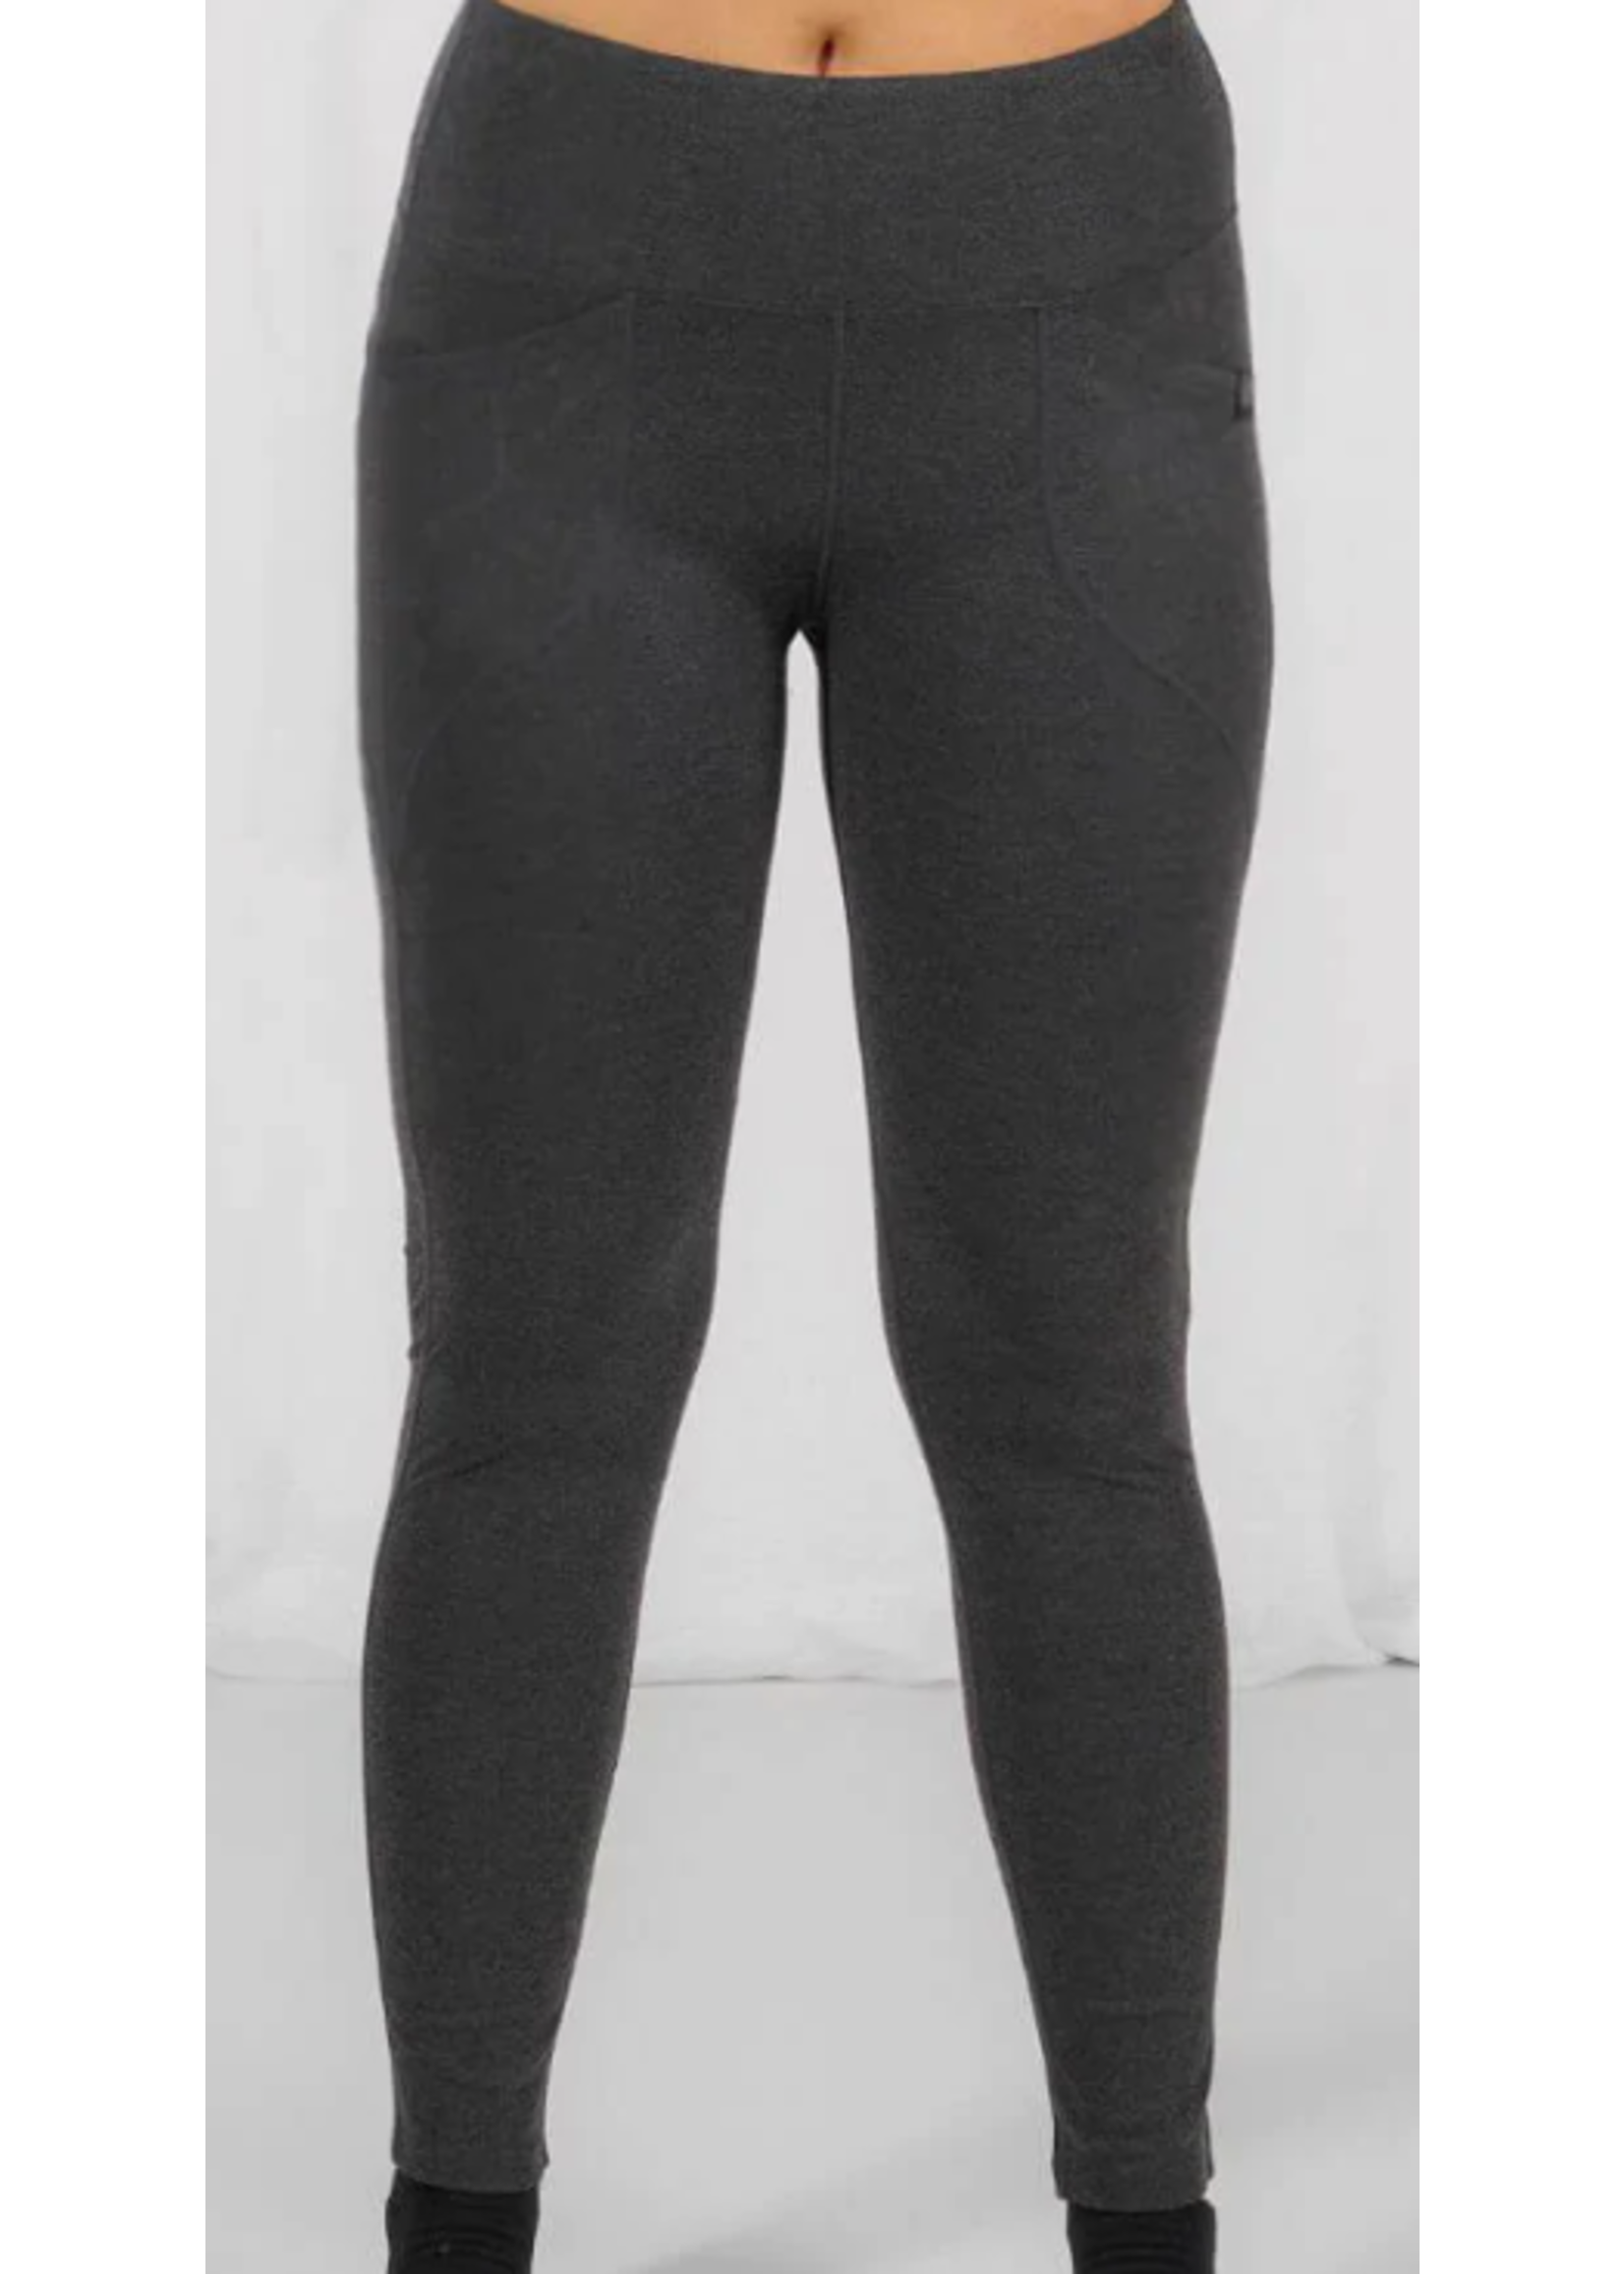 Face Plant Dreams FPD Soft Collection Lounge Legging Soft Black Small